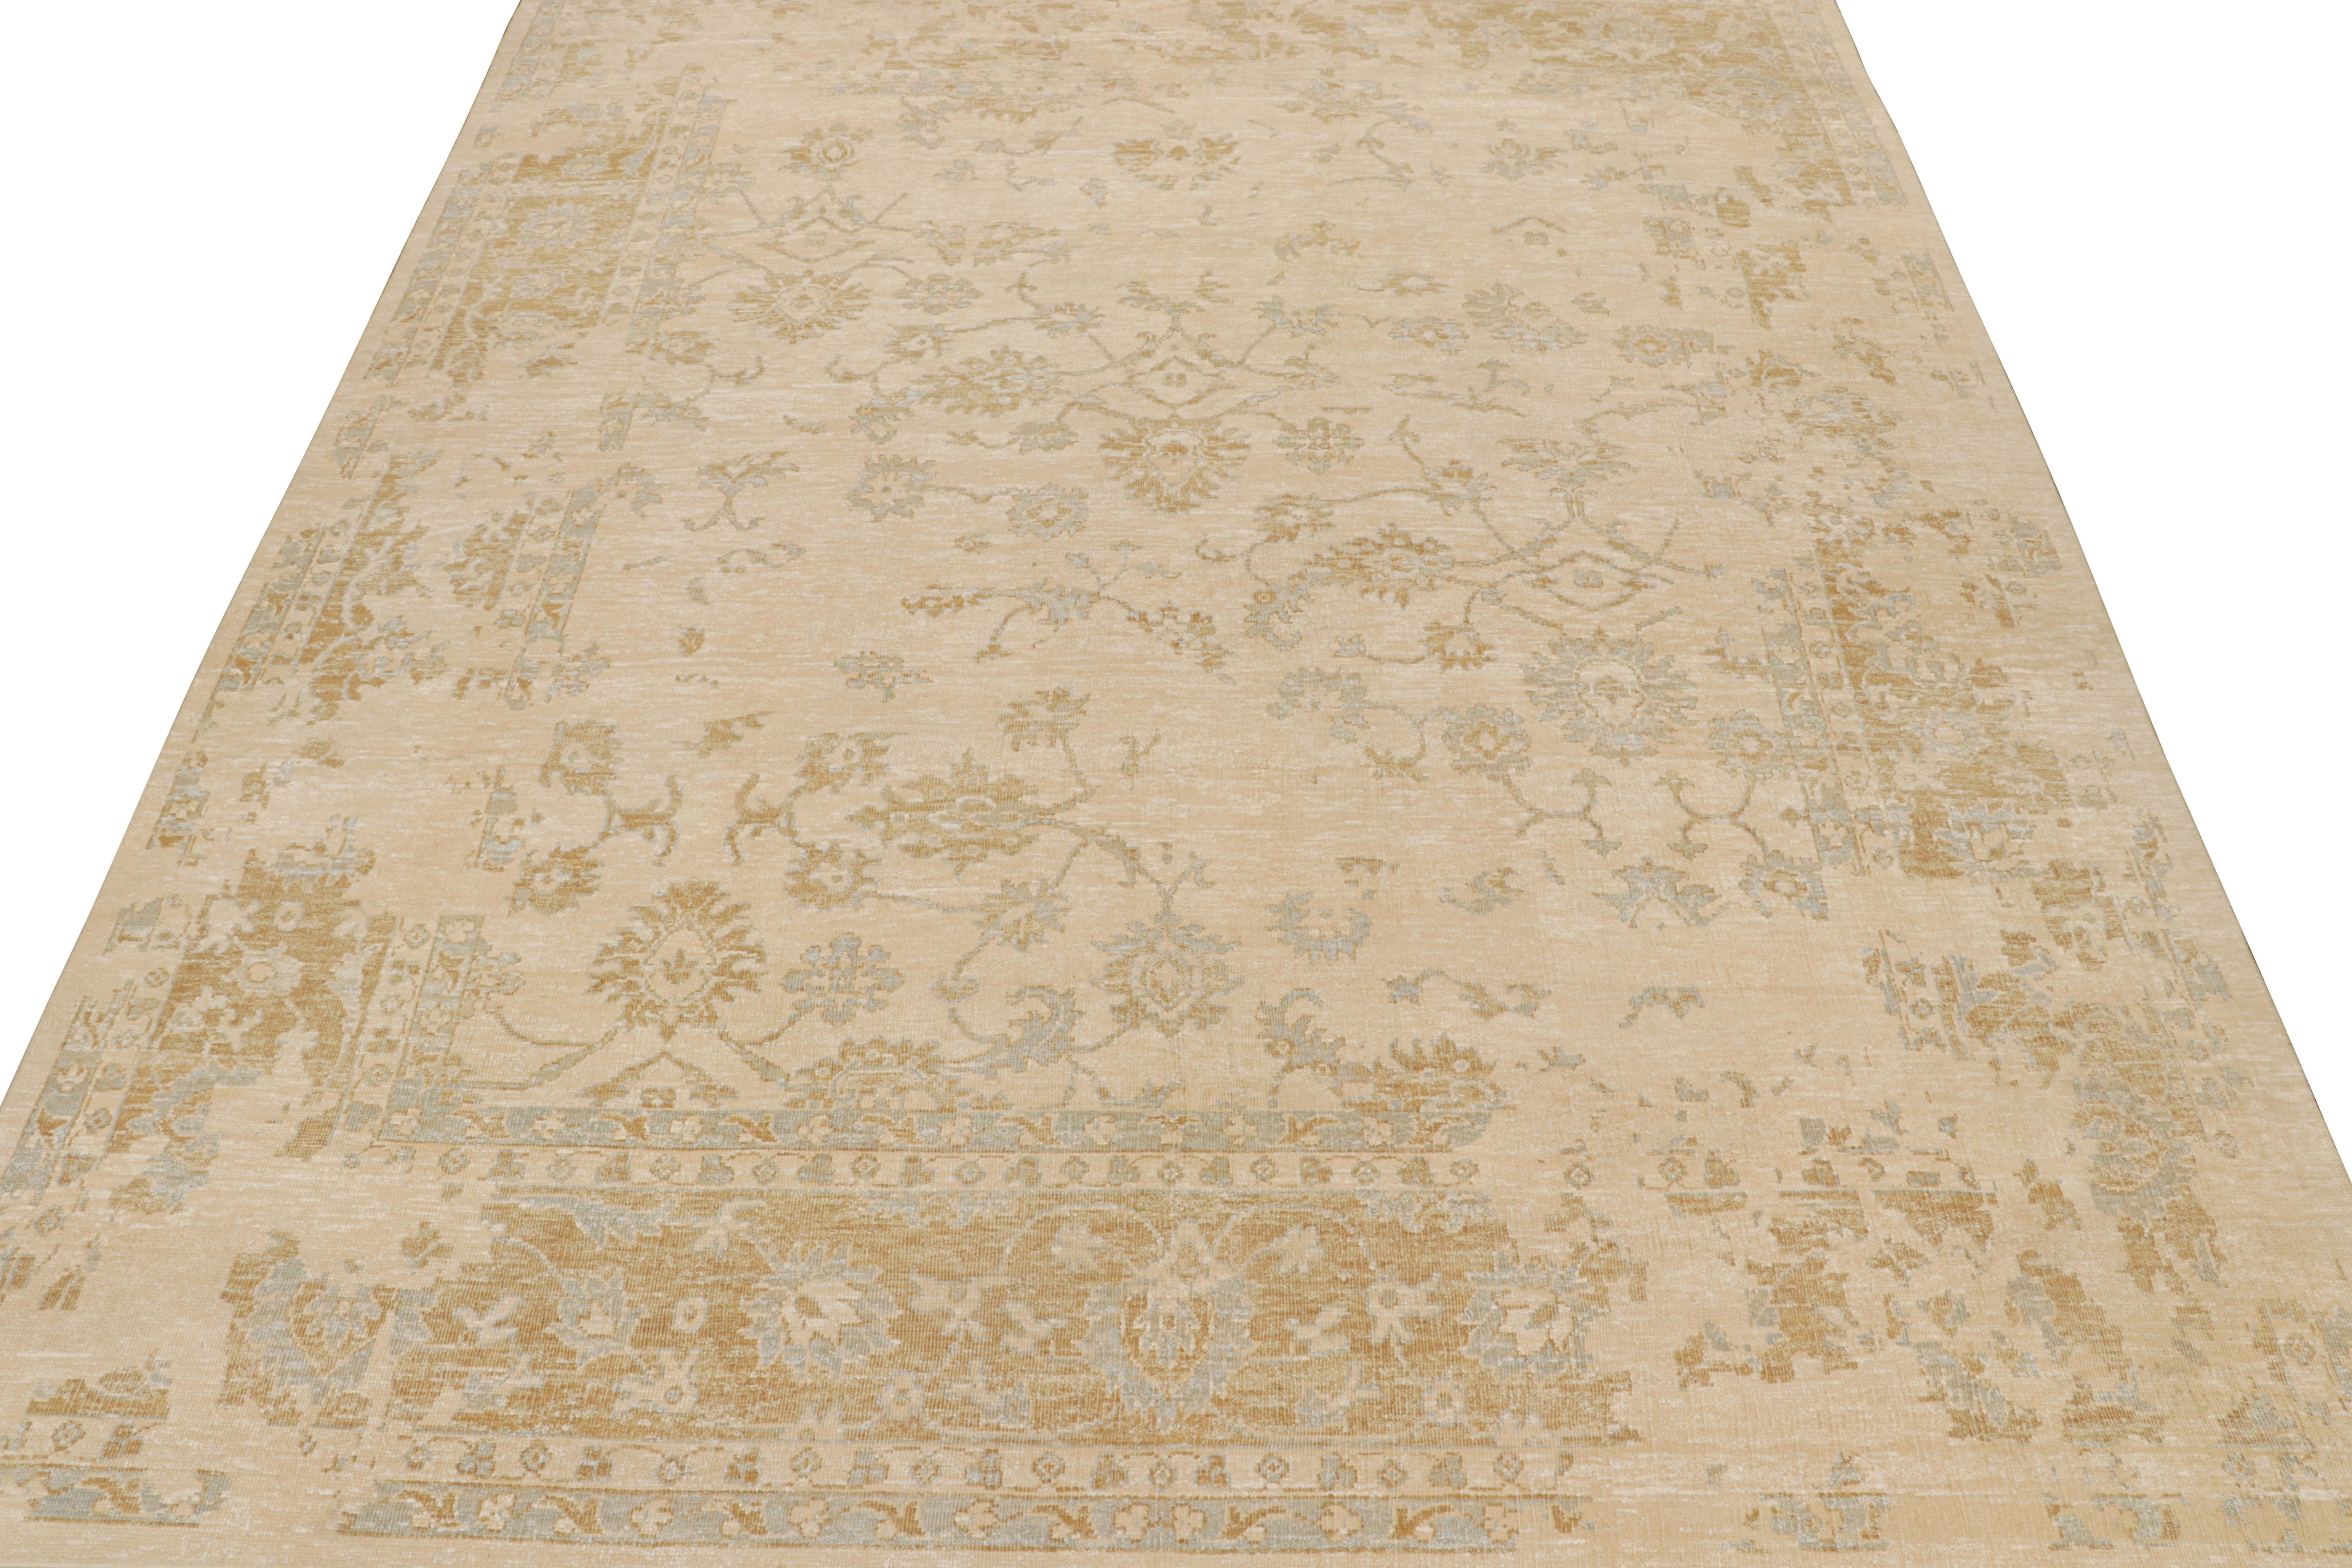 Indian Rug & Kilim’s Oushak Style Rug in Cream with Gold and Blue Floral Patterns For Sale